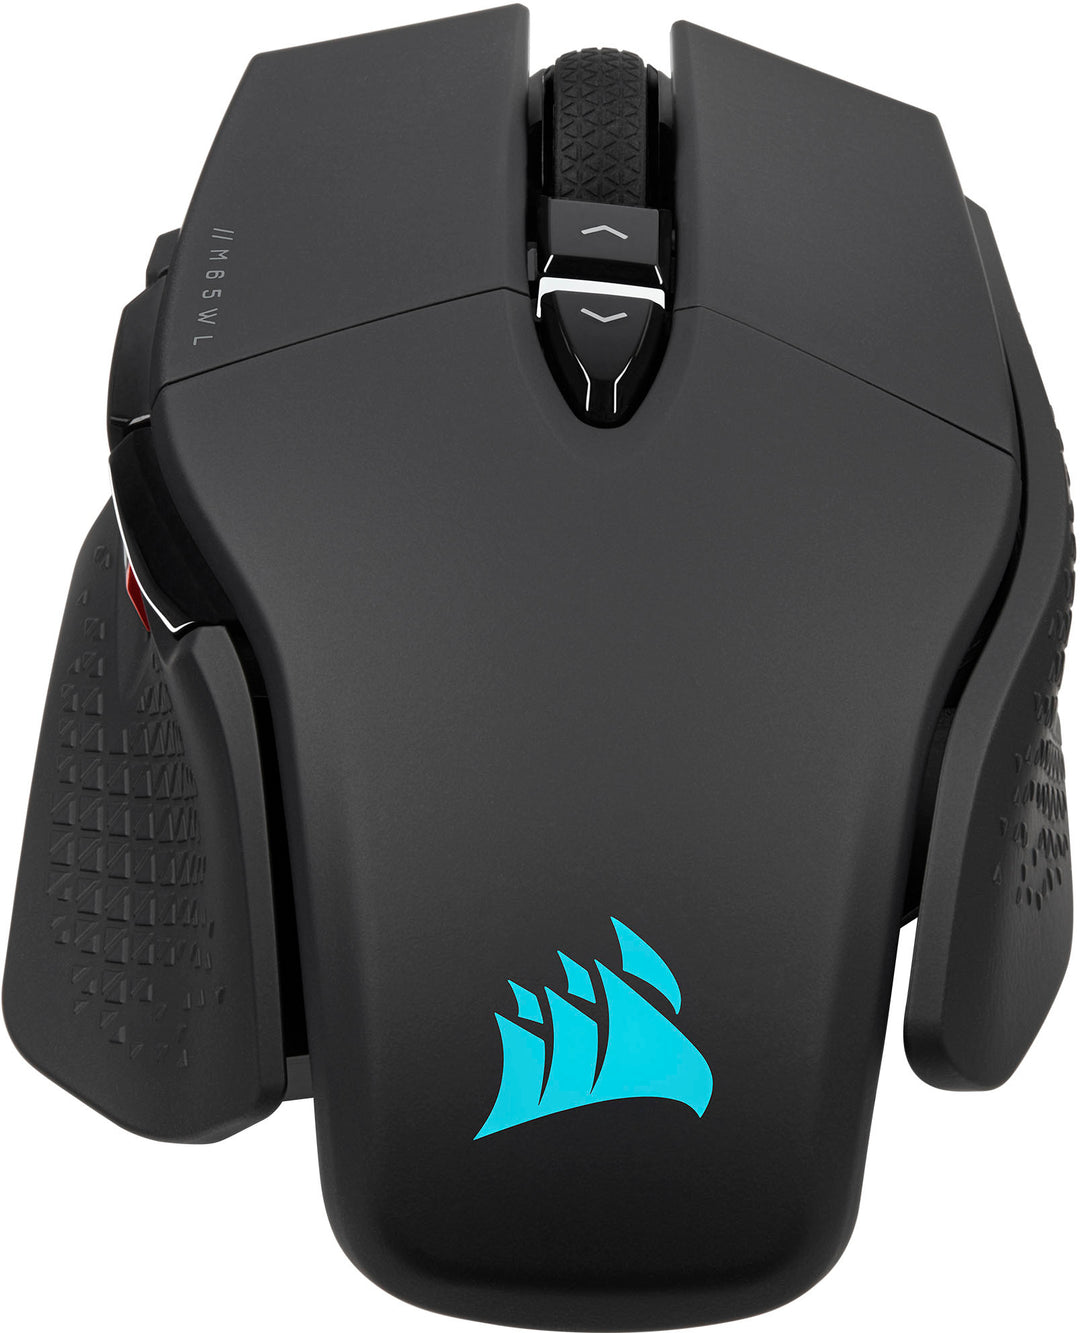 CORSAIR - M65 Ultra Wireless Optical Gaming Mouse with Slipstream Technology - Black_10